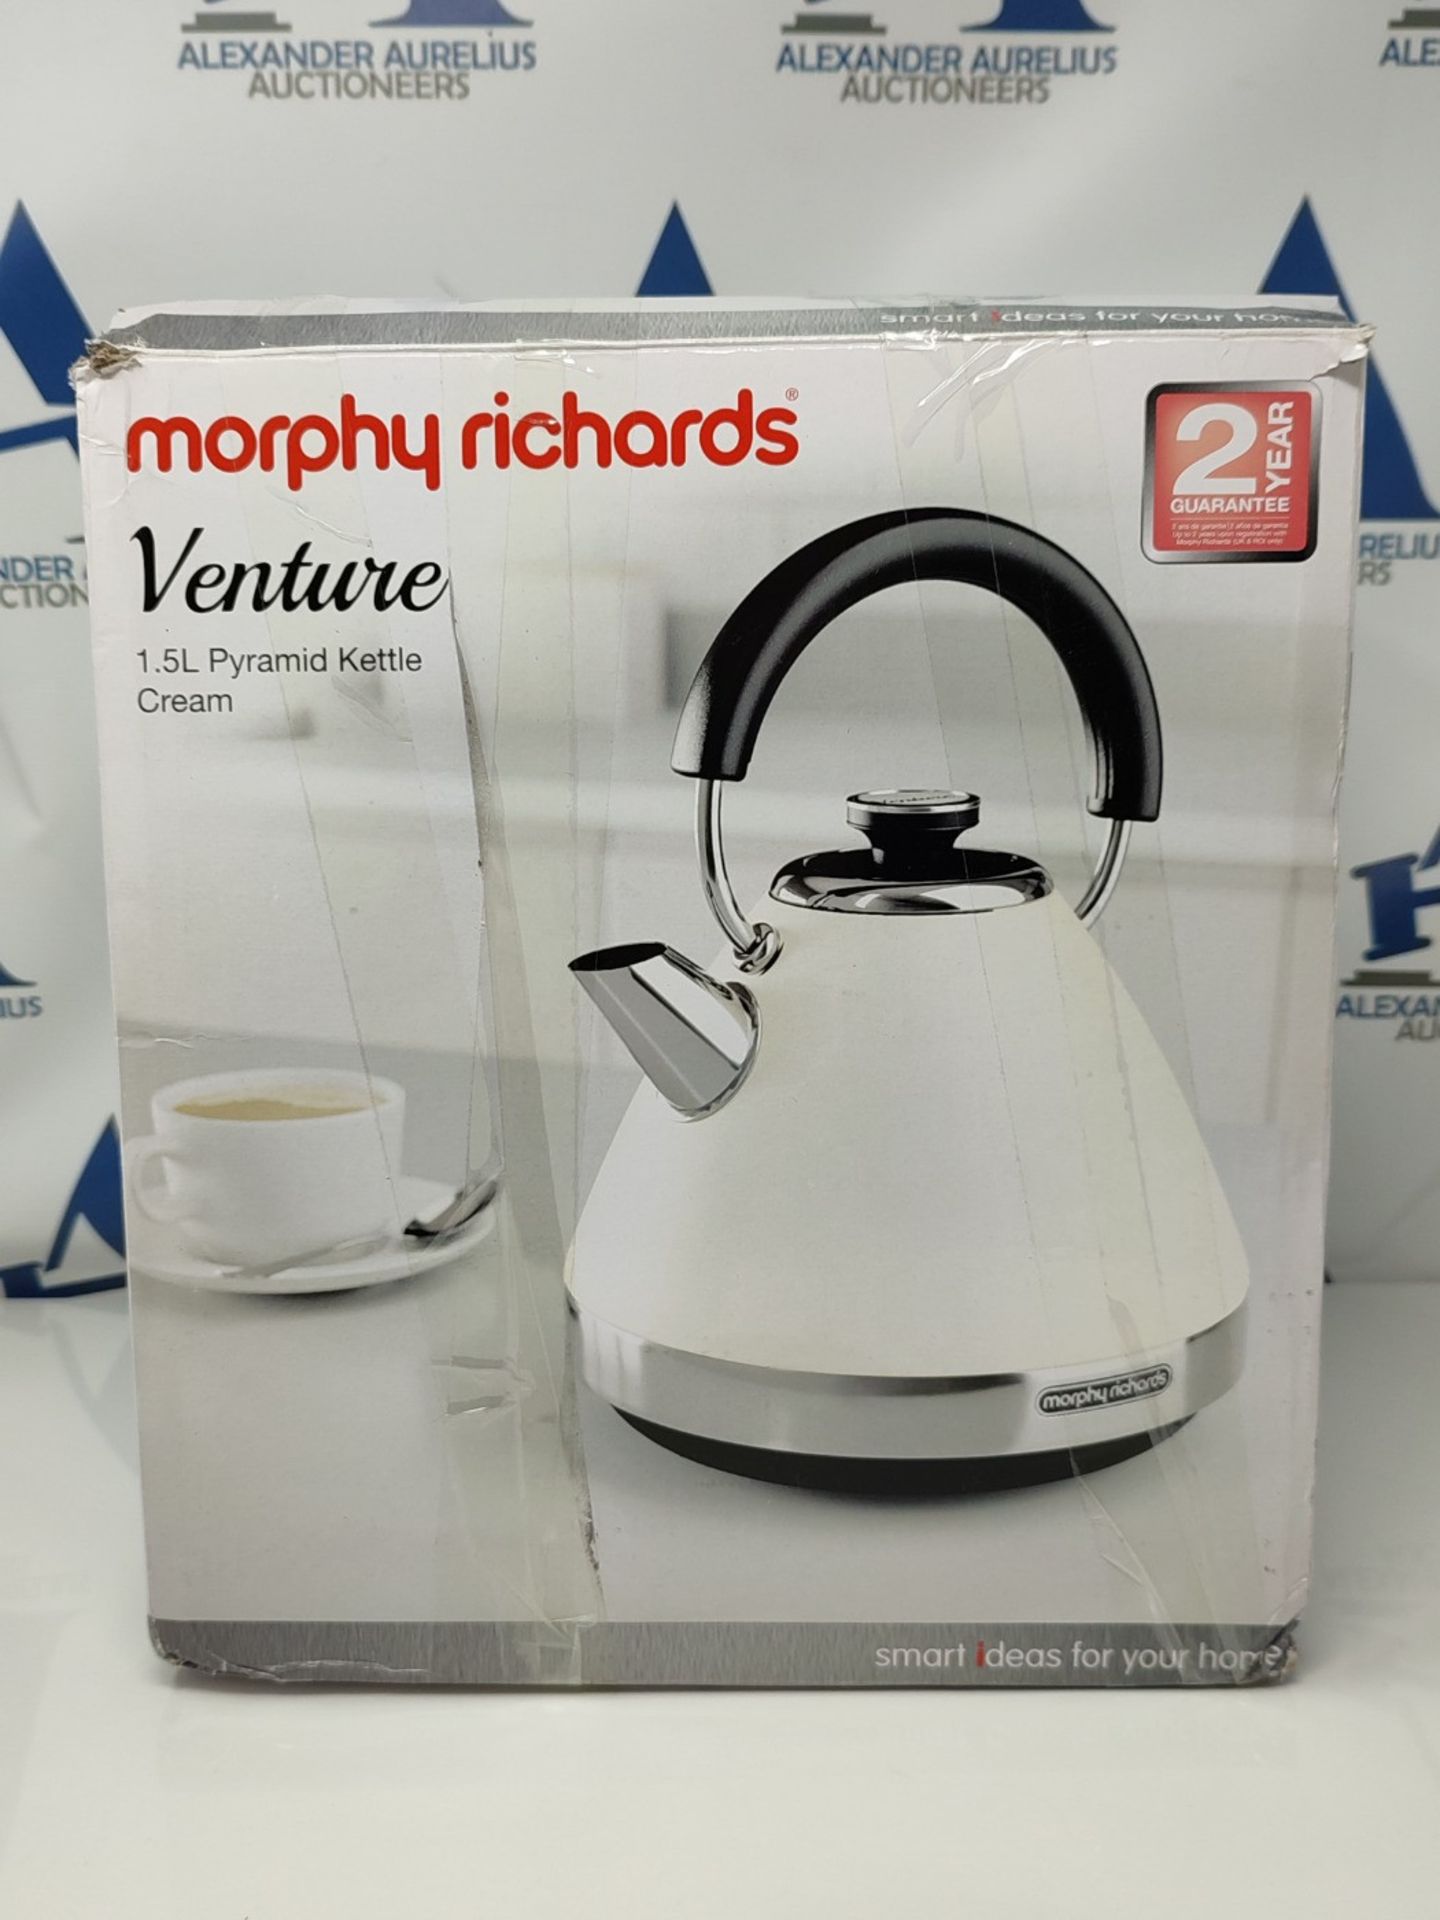 Morphy Richards Venture Cream Pyramid Kettle - 1.5L - 3kW - Rapid Boil - 100132 - Image 3 of 3